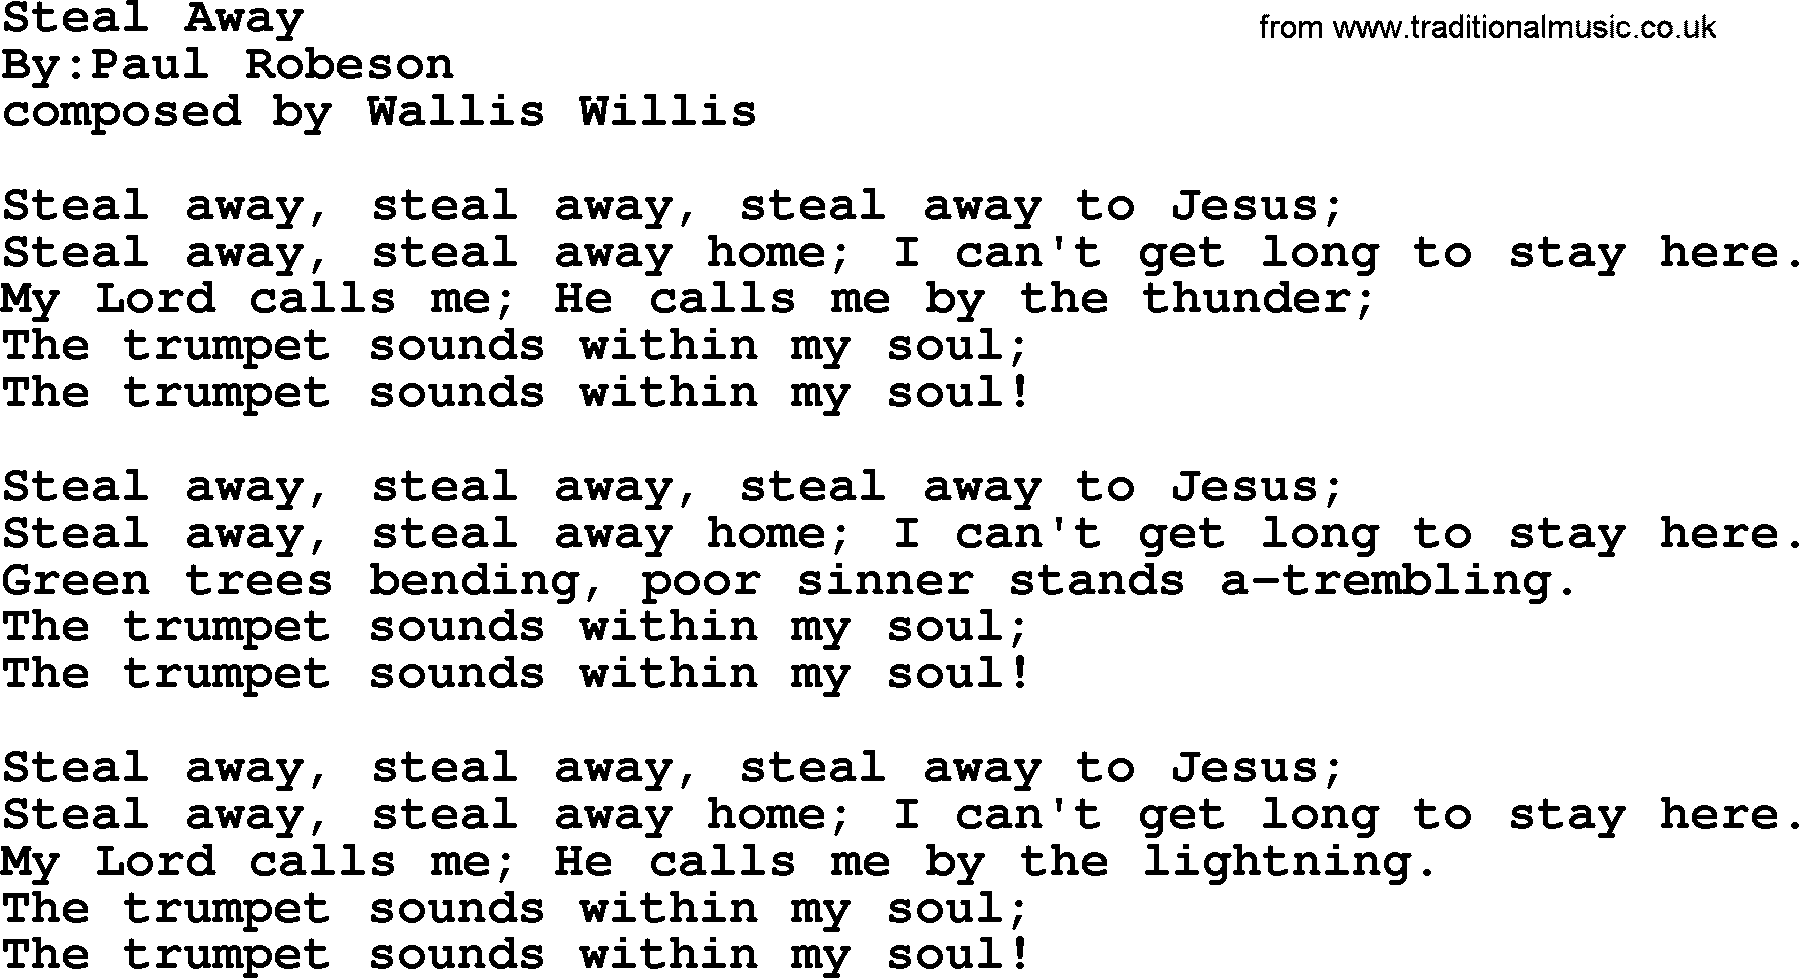 Political, Solidarity, Workers or Union song: Steal Away, lyrics